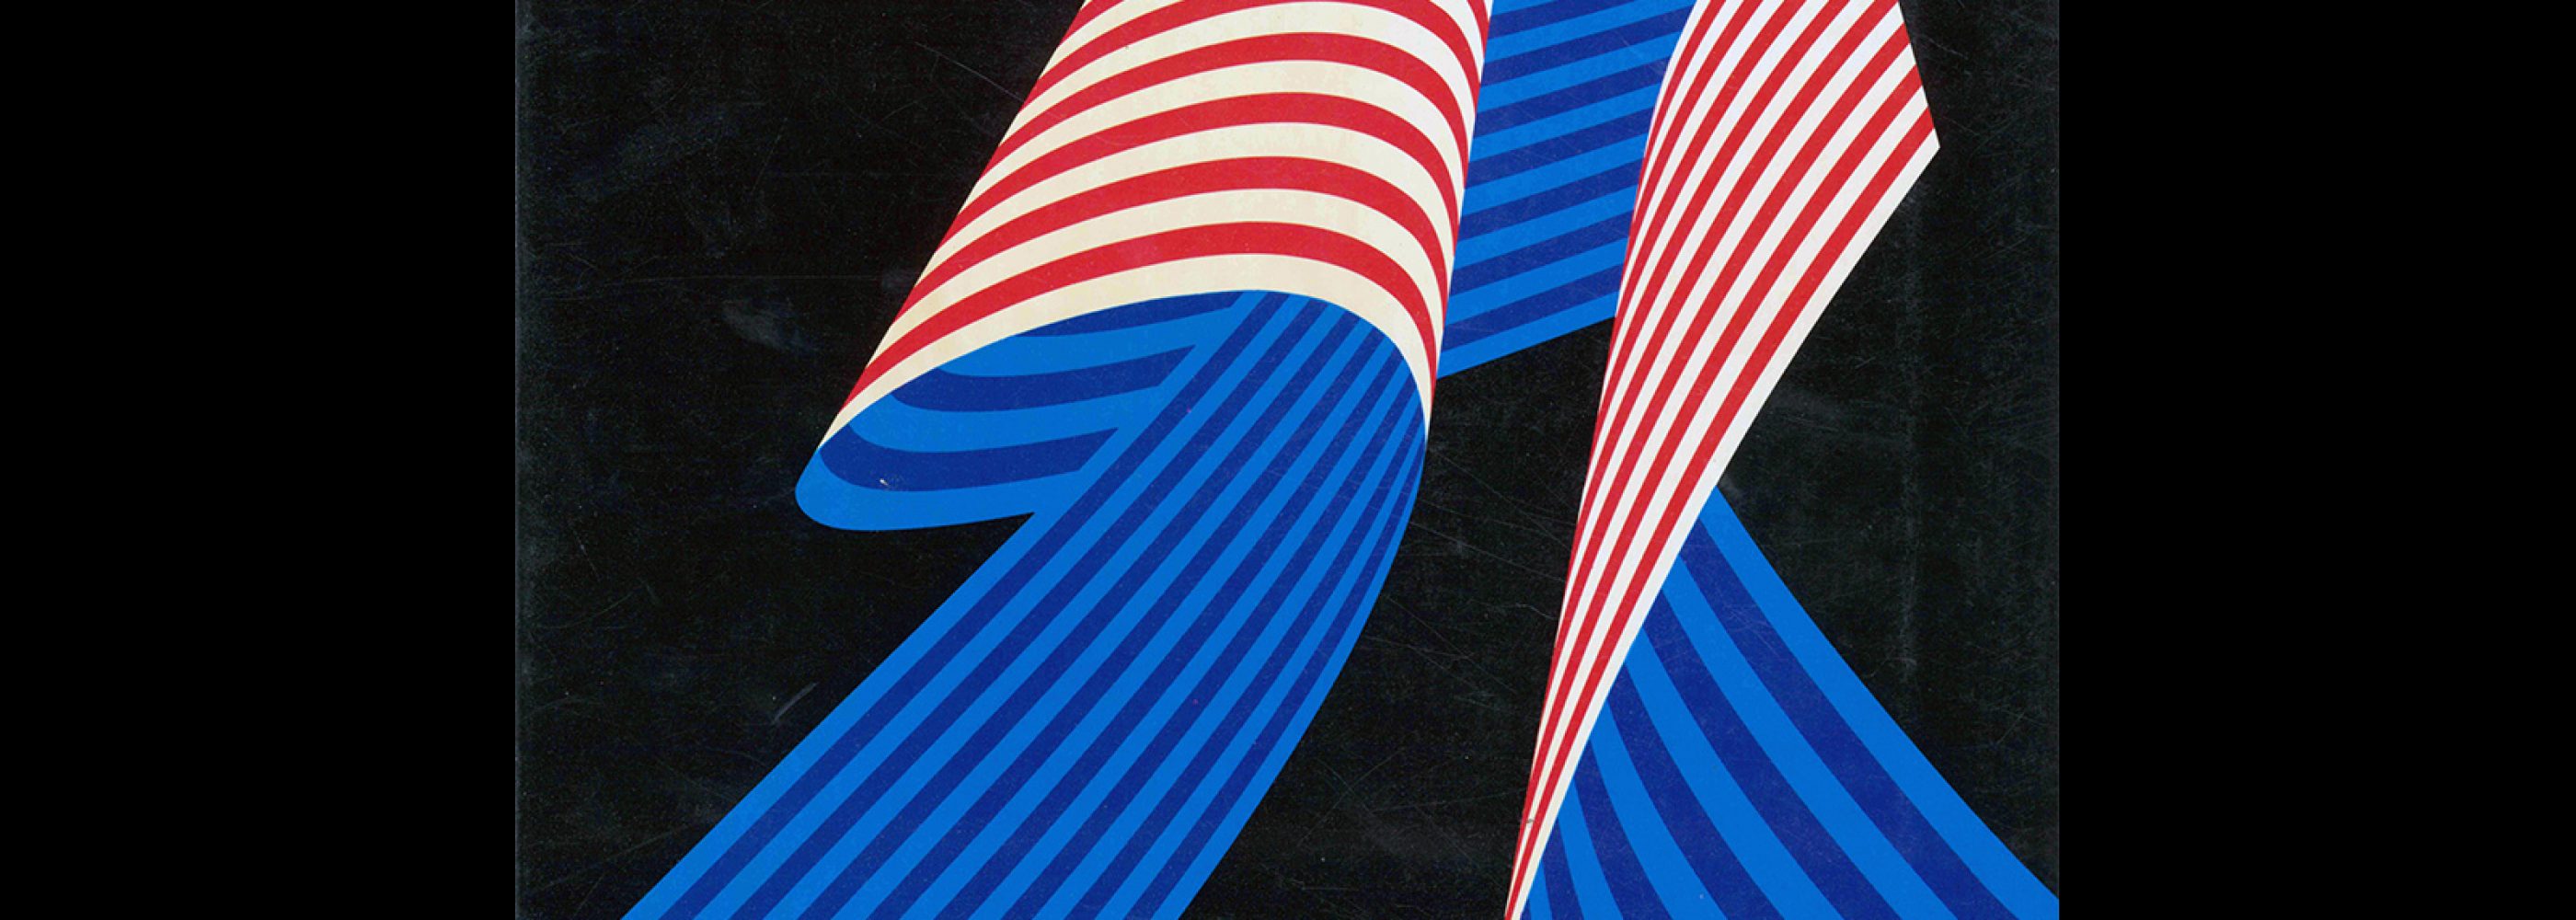 Graphis 180, 1975. Cover design by Franco Grignani.